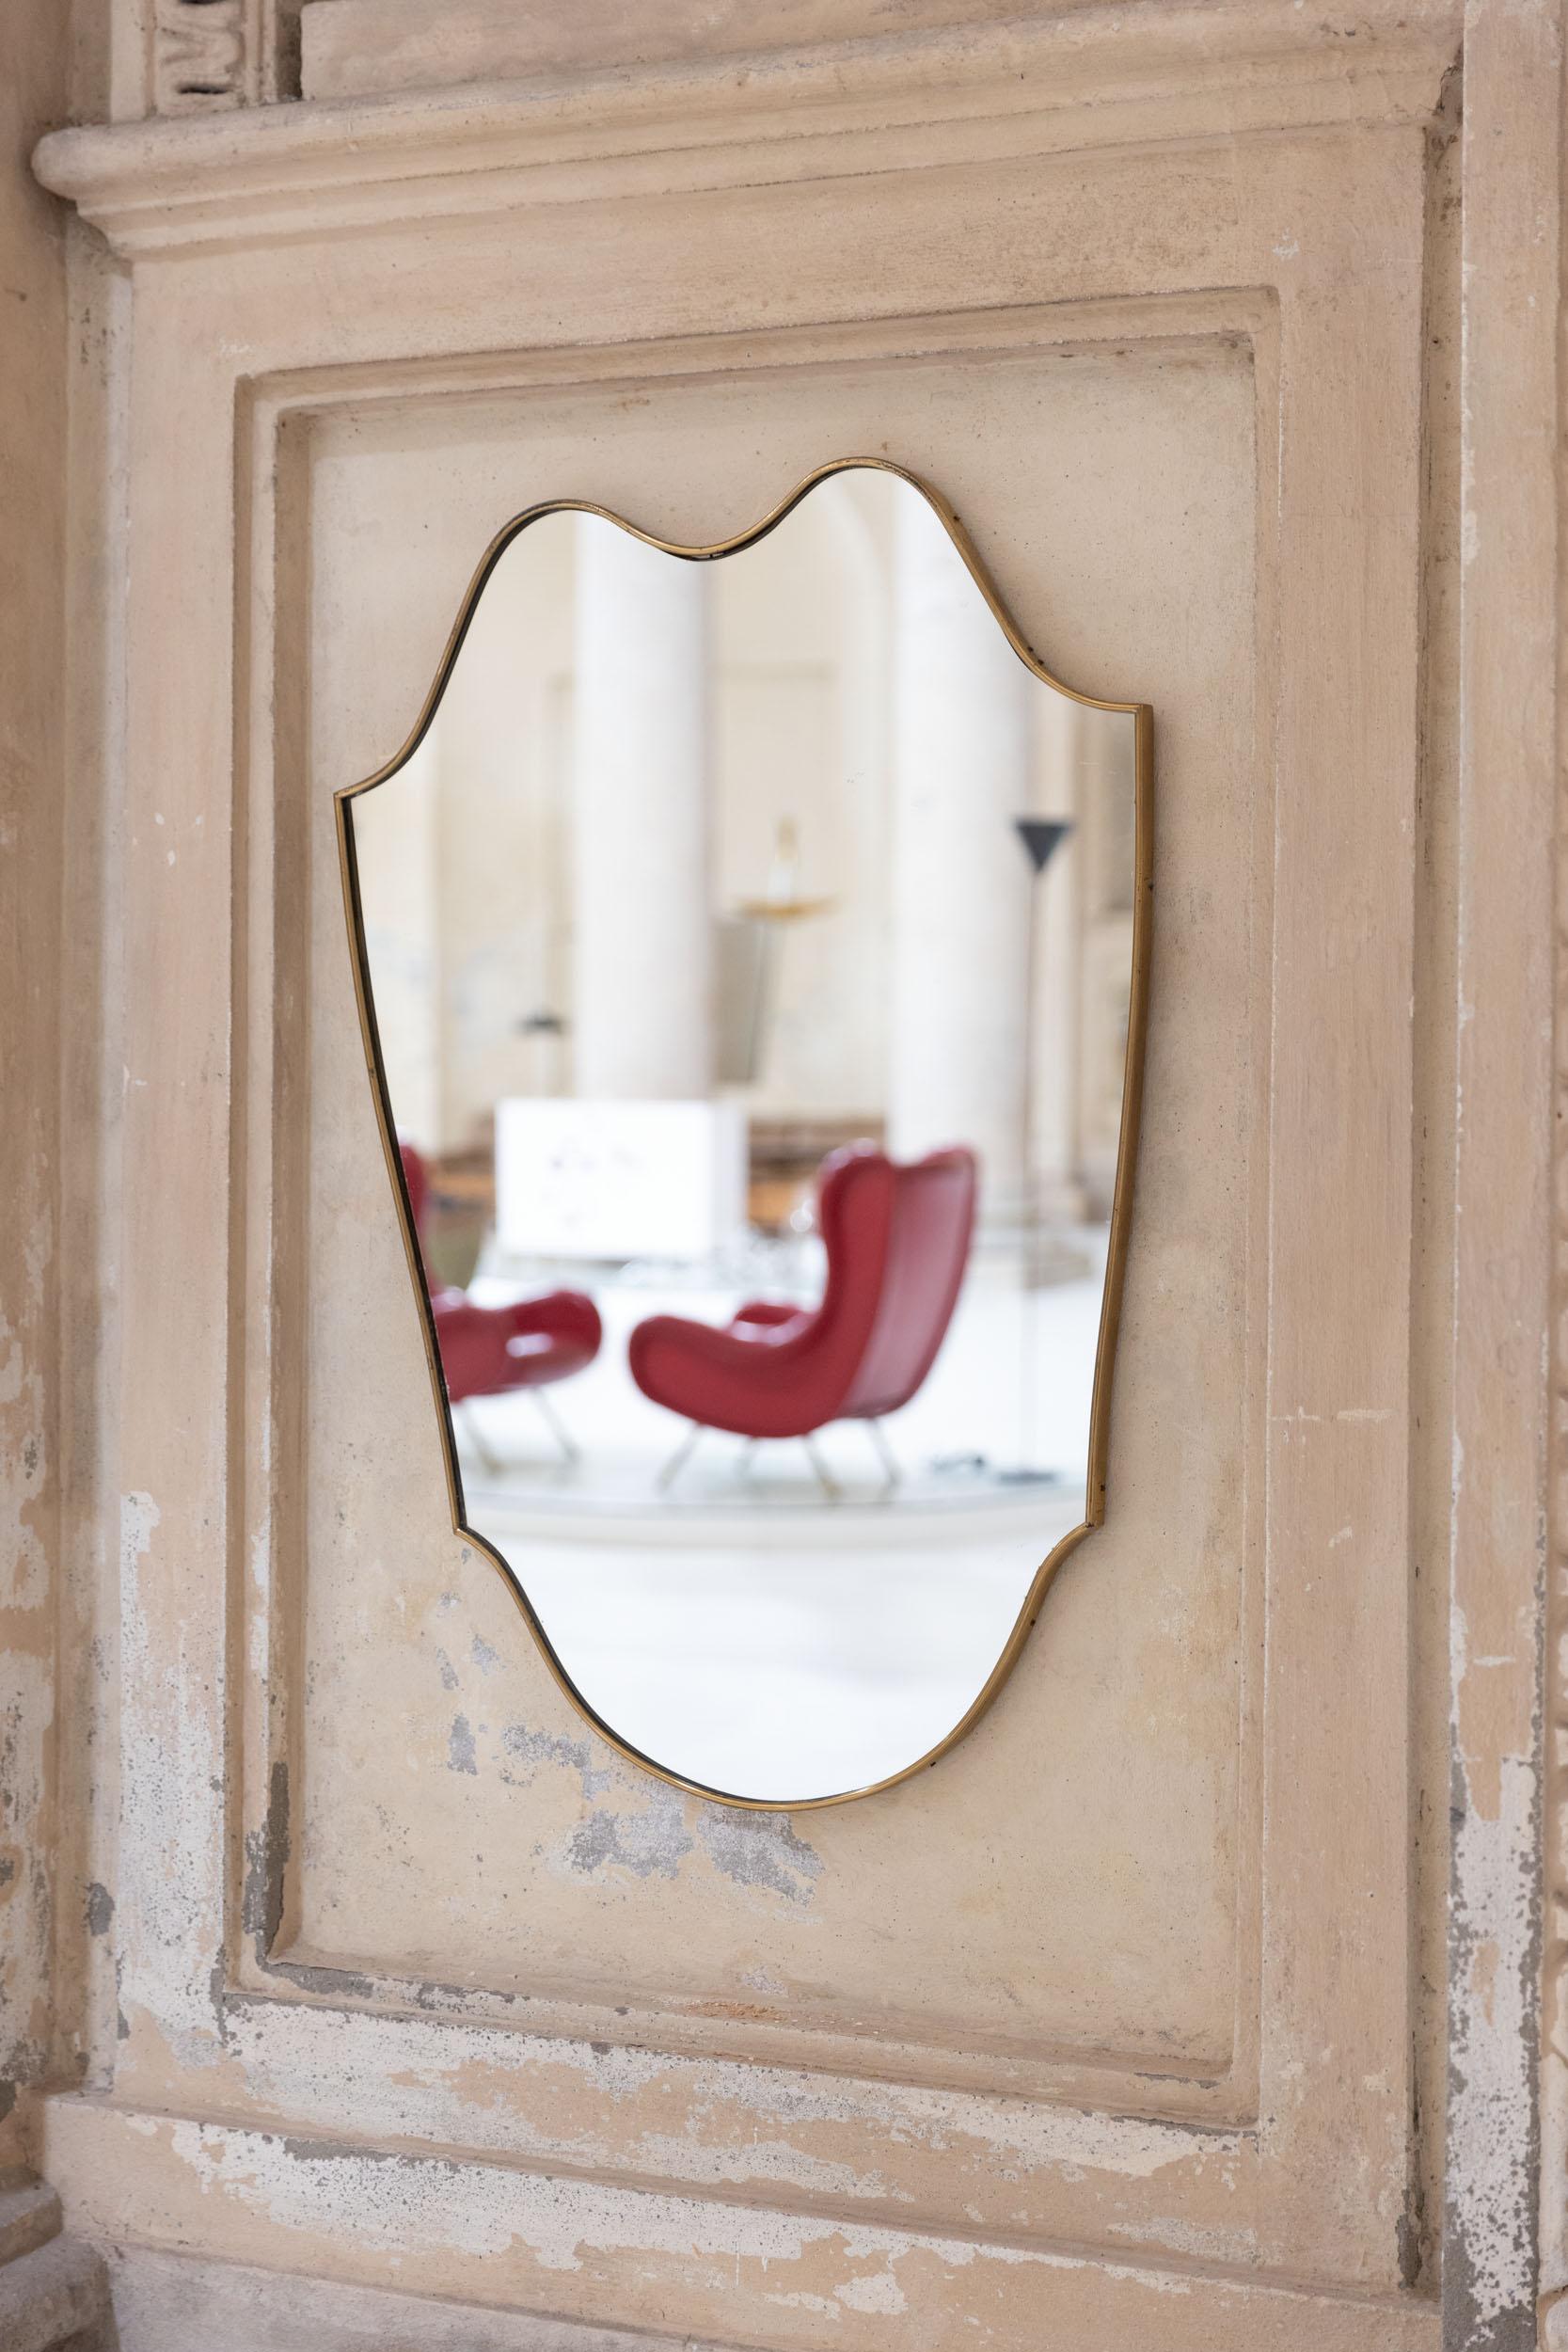 Midcentury Italian wall mirror, elegant brass frame with amazing shape and beautiful vintage patina. 
Excellent condition with original mirror.
Italy, 1950 